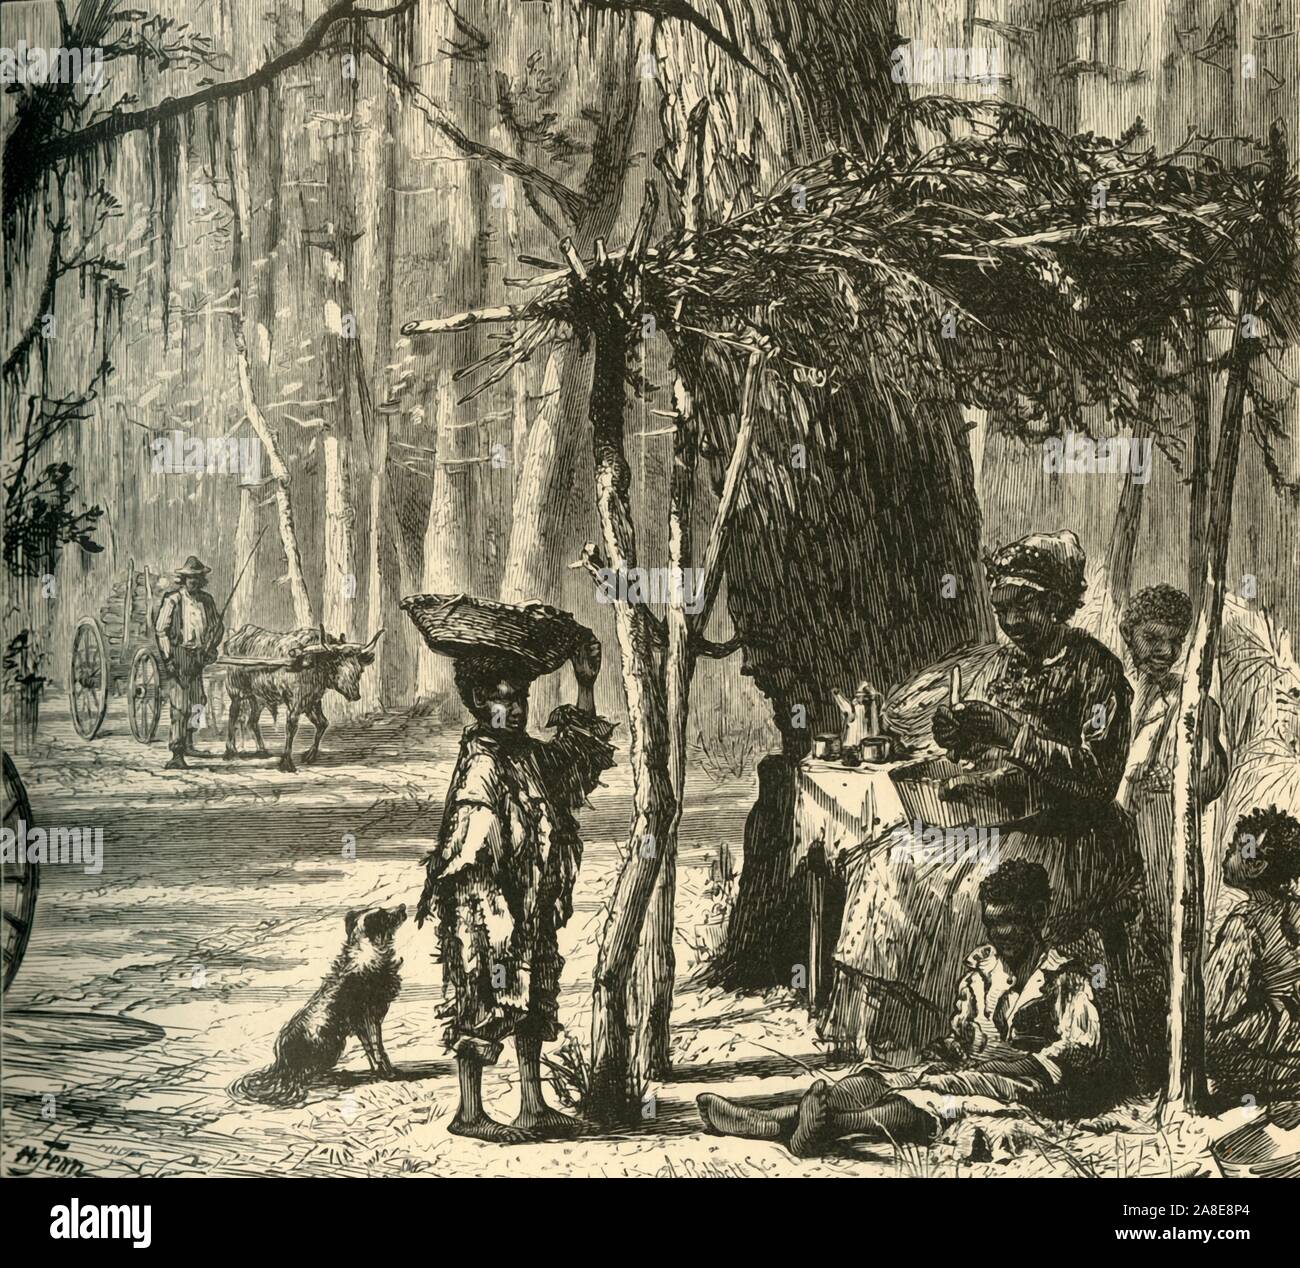 'A Road-side Scene near Charleston', 1872. Poor blacks in South Carolina, USA. Slavery had only been abolished in 1863, fewer than ten years before this picture was made. From &quot;Picturesque America; or, The Land We Live In, A Delineation by Pen and Pencil of the Mountains, Rivers, Lakes...with Illustrations on Steel and Wood by Eminent American Artists&quot; Vol. I, edited by William Cullen Bryant. [D. Appleton and Company, New York, 1872] Stock Photo